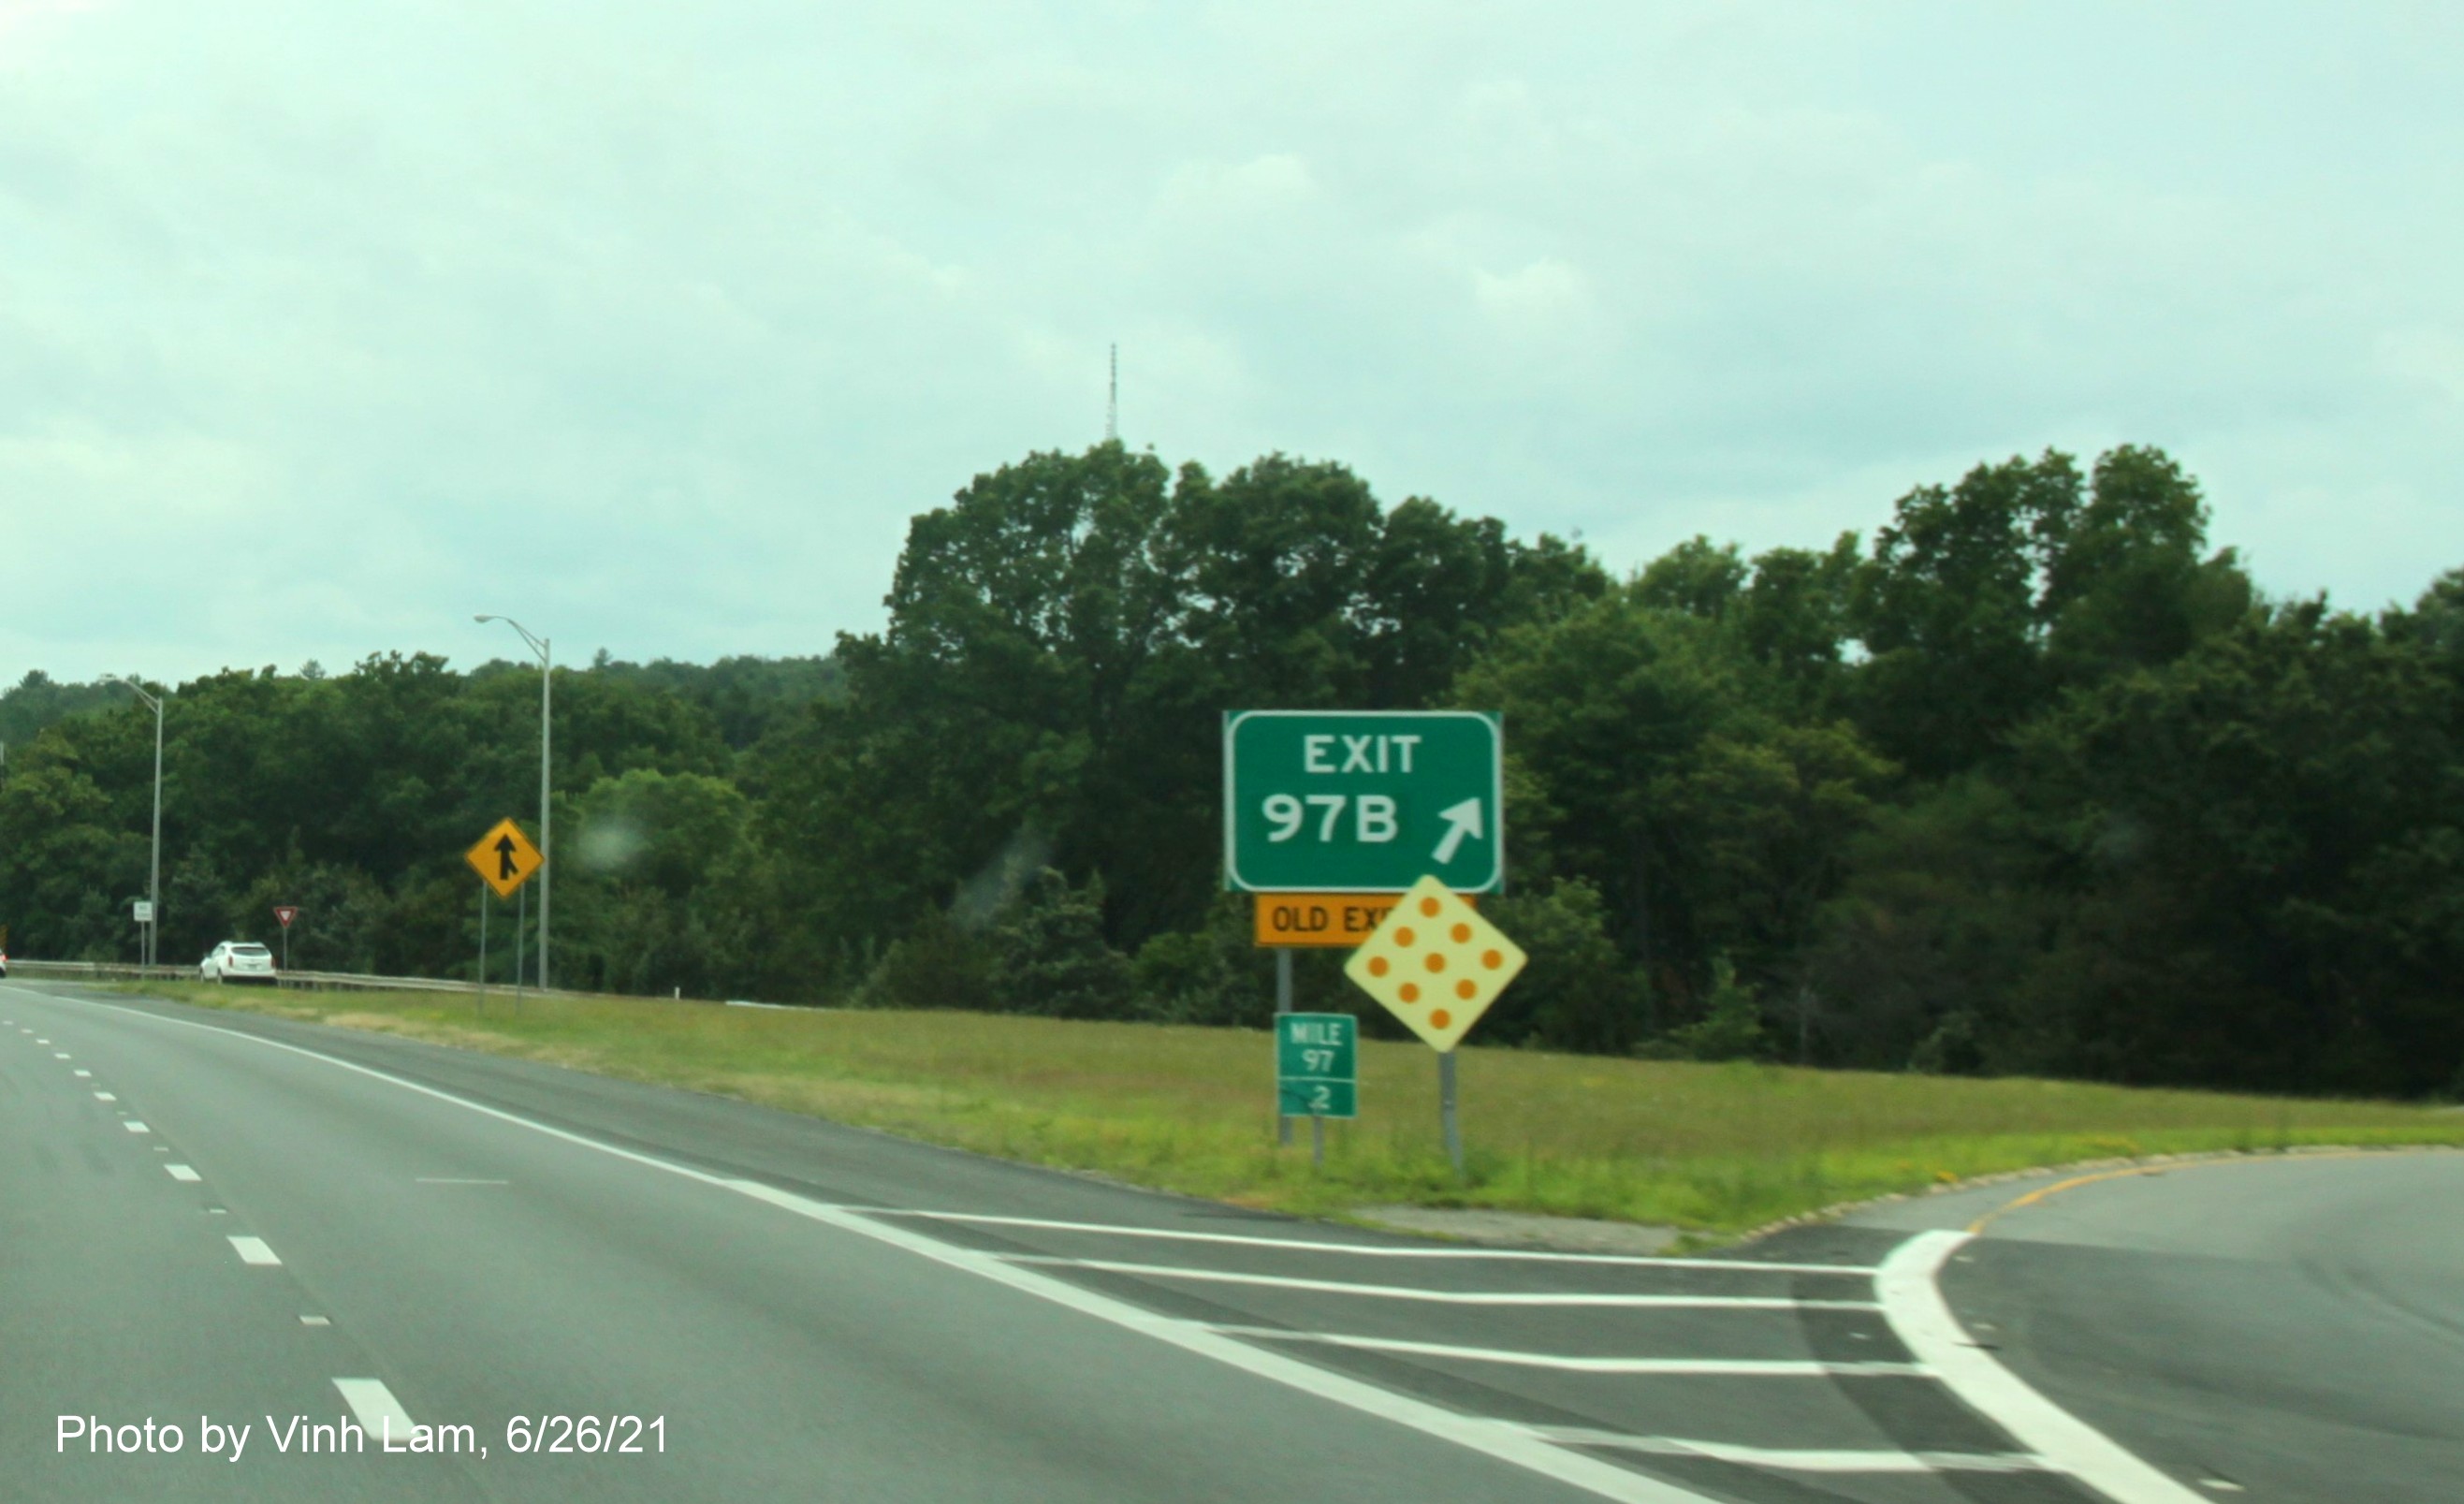 Image of gore sign for I-93 North exit with new milepost based exit number and yellow Old Exit 40B sign attached below on I-495 South in Andover, by Vinh Lam, June 2021